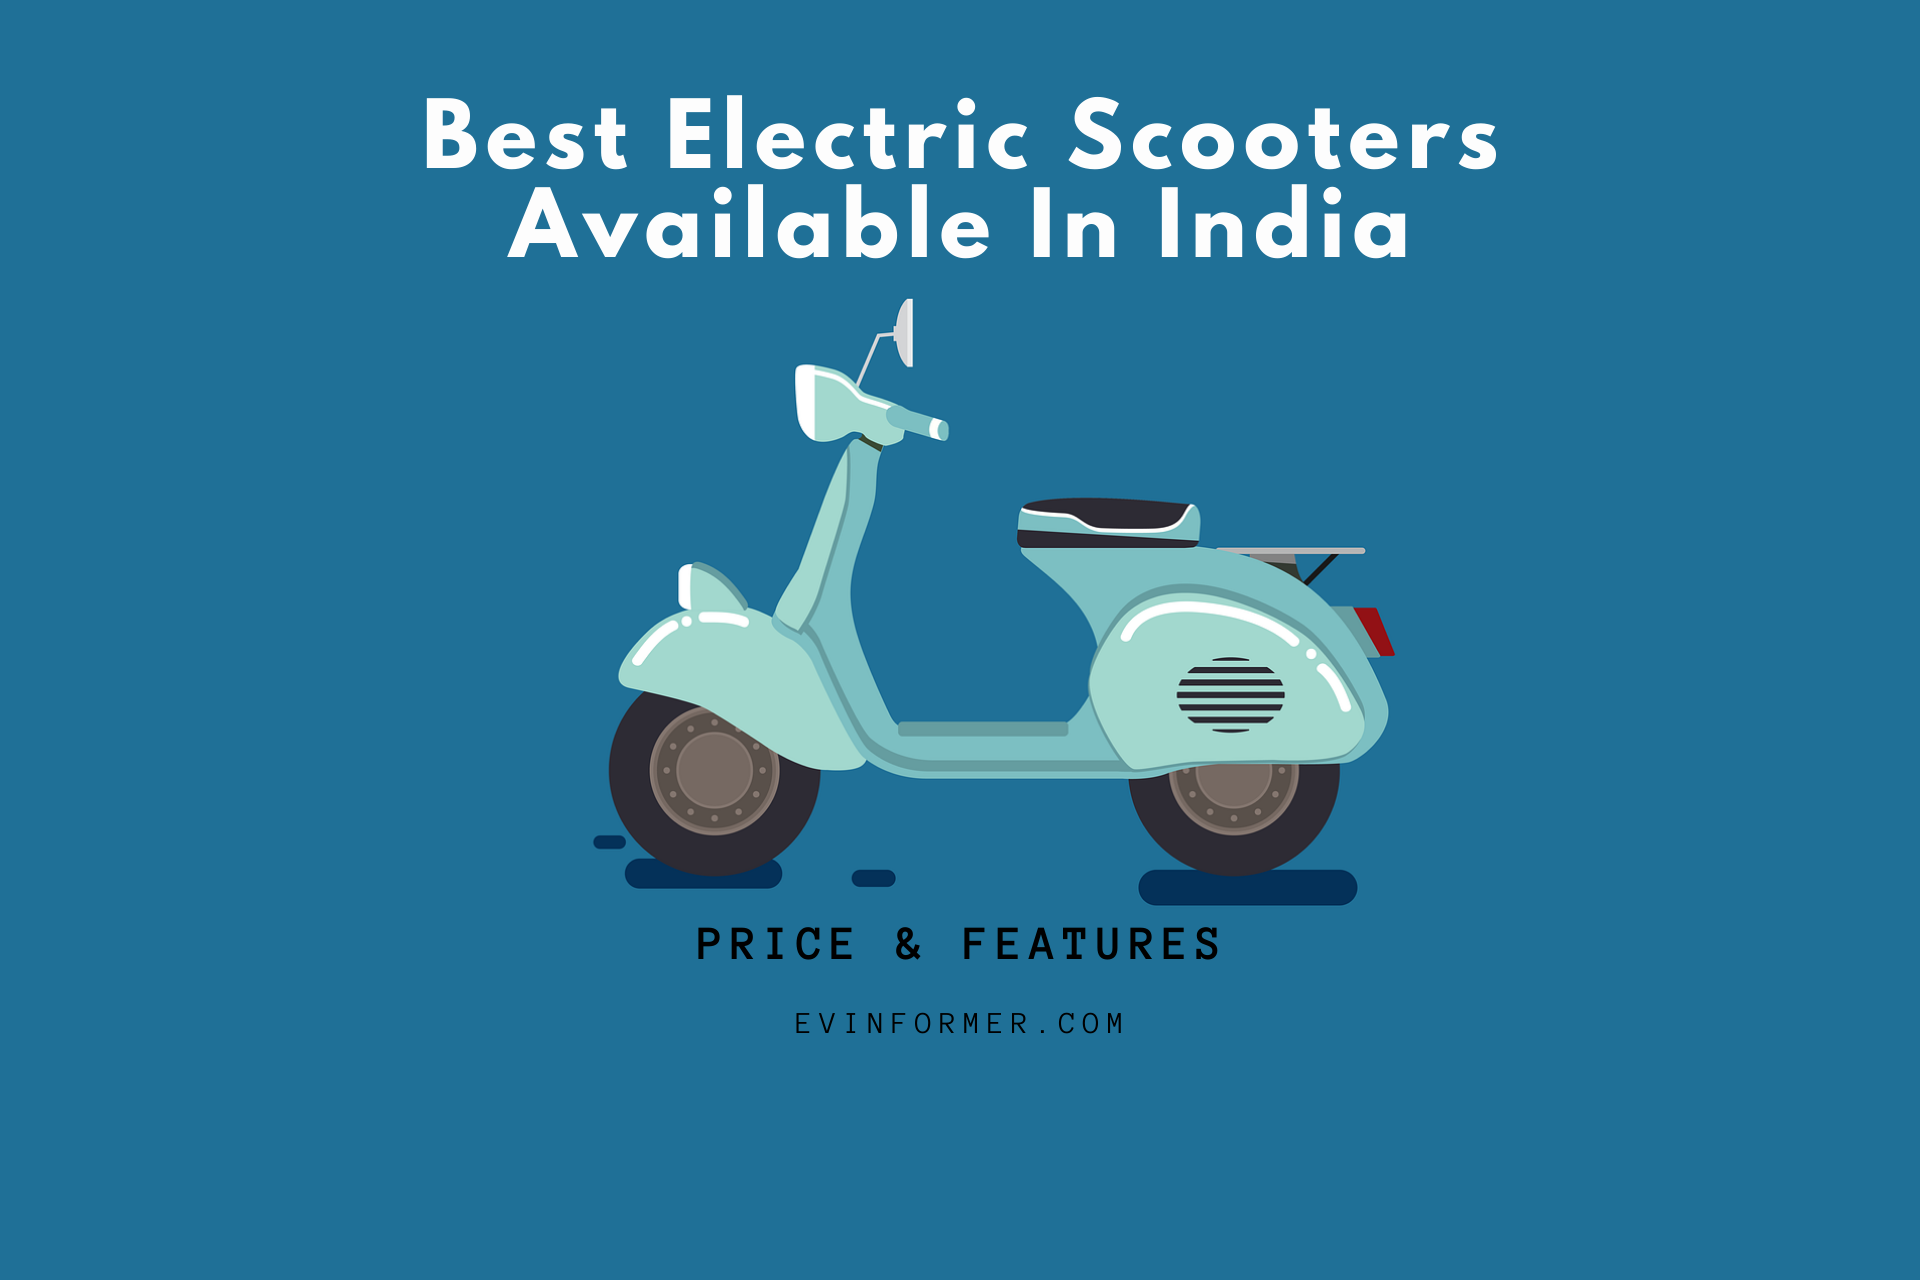 Best Electric Scooters Available In India